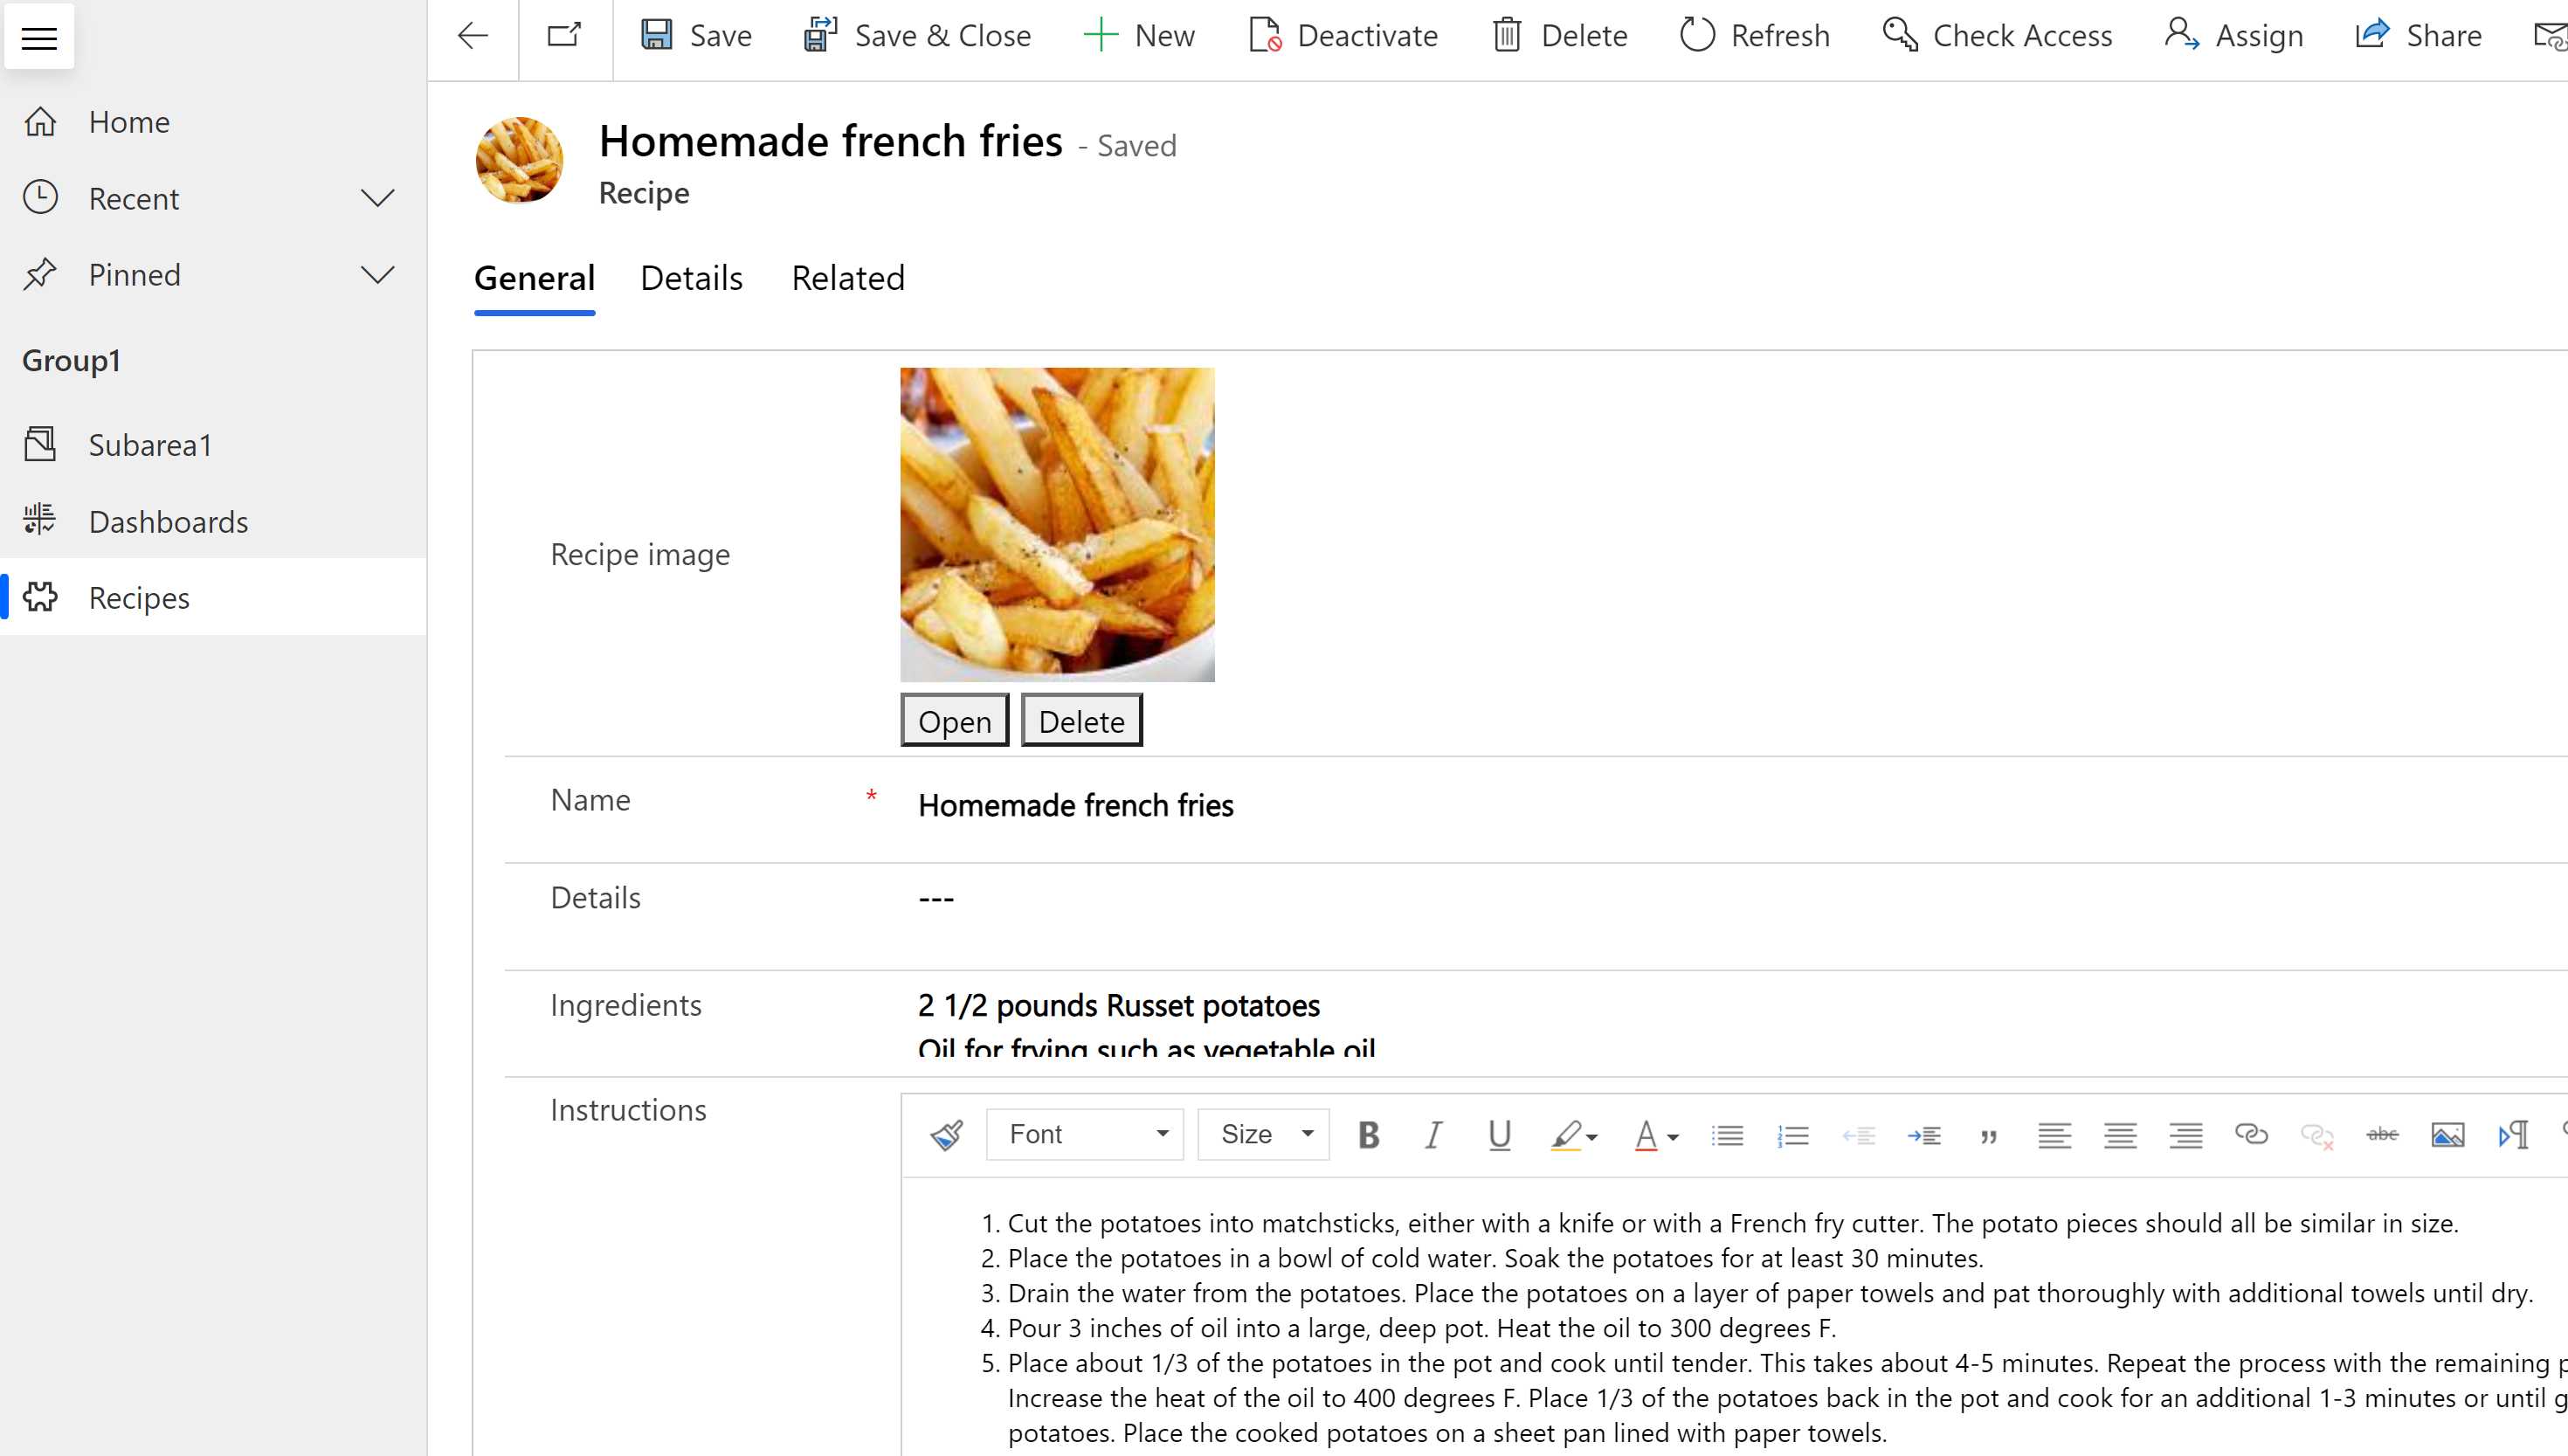 Form at runtime with french fries primary image displayed on a recipe table record